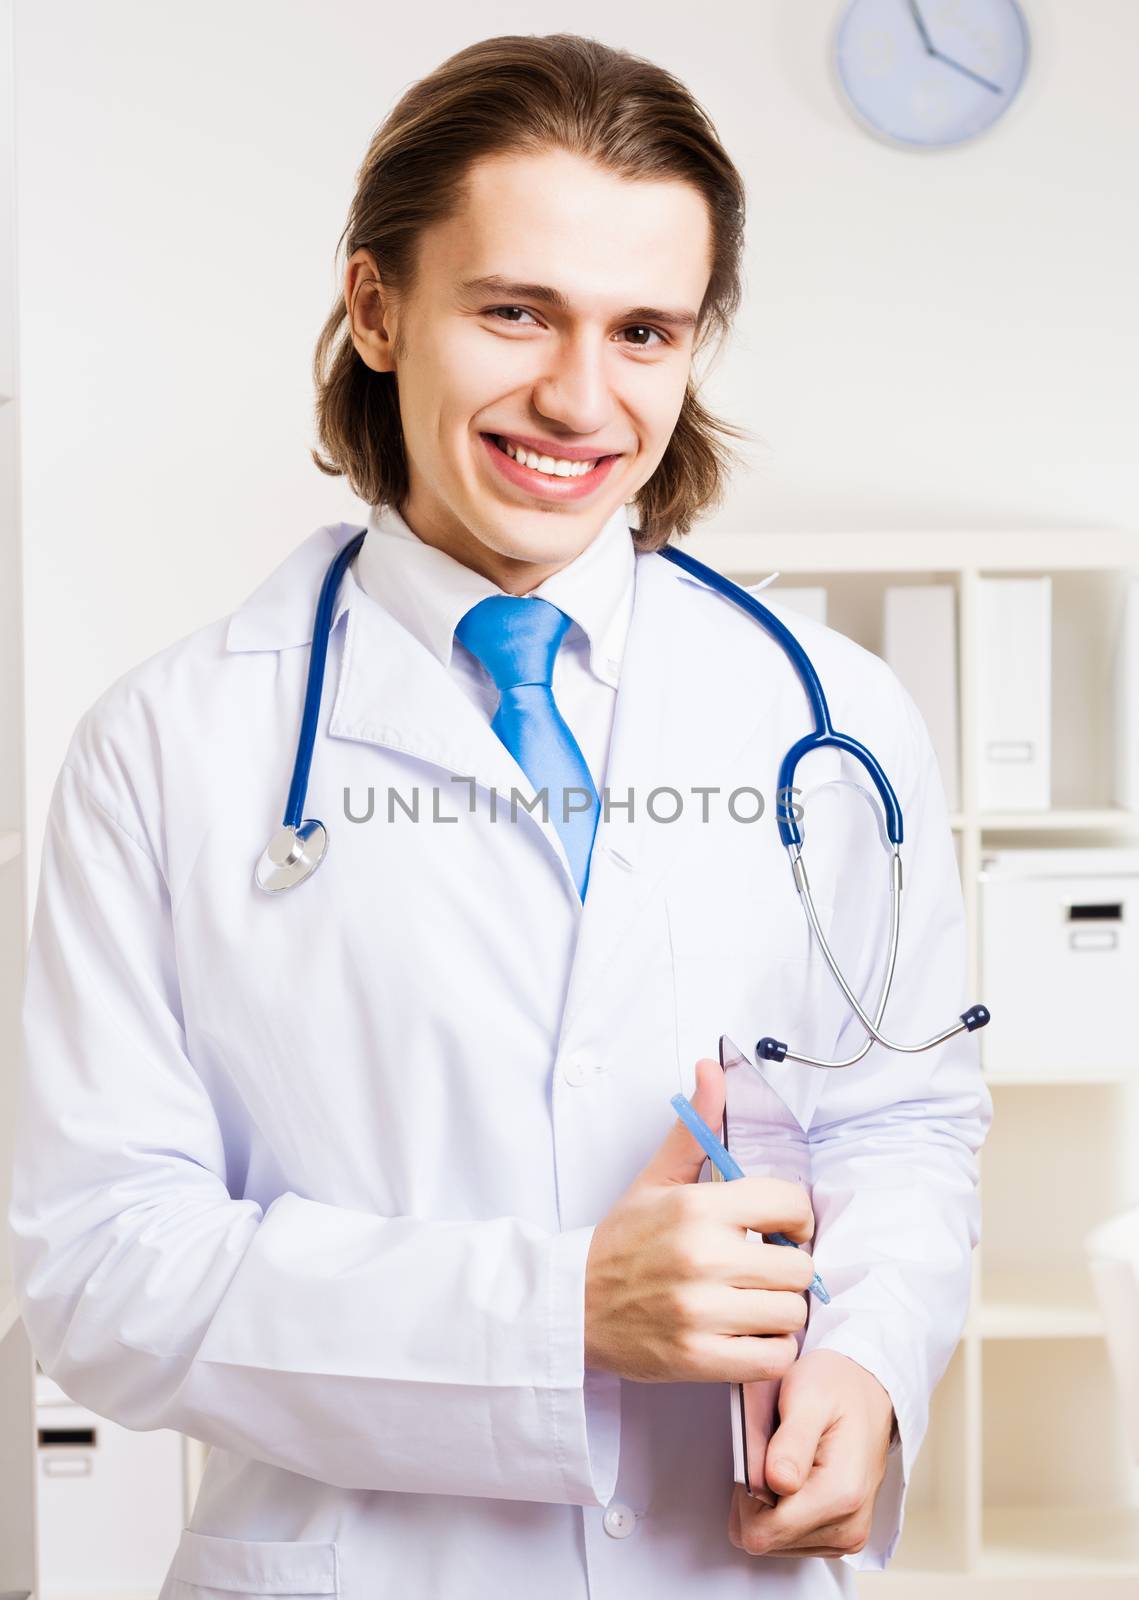 Portrait of a doctor smiling and looking at the camera